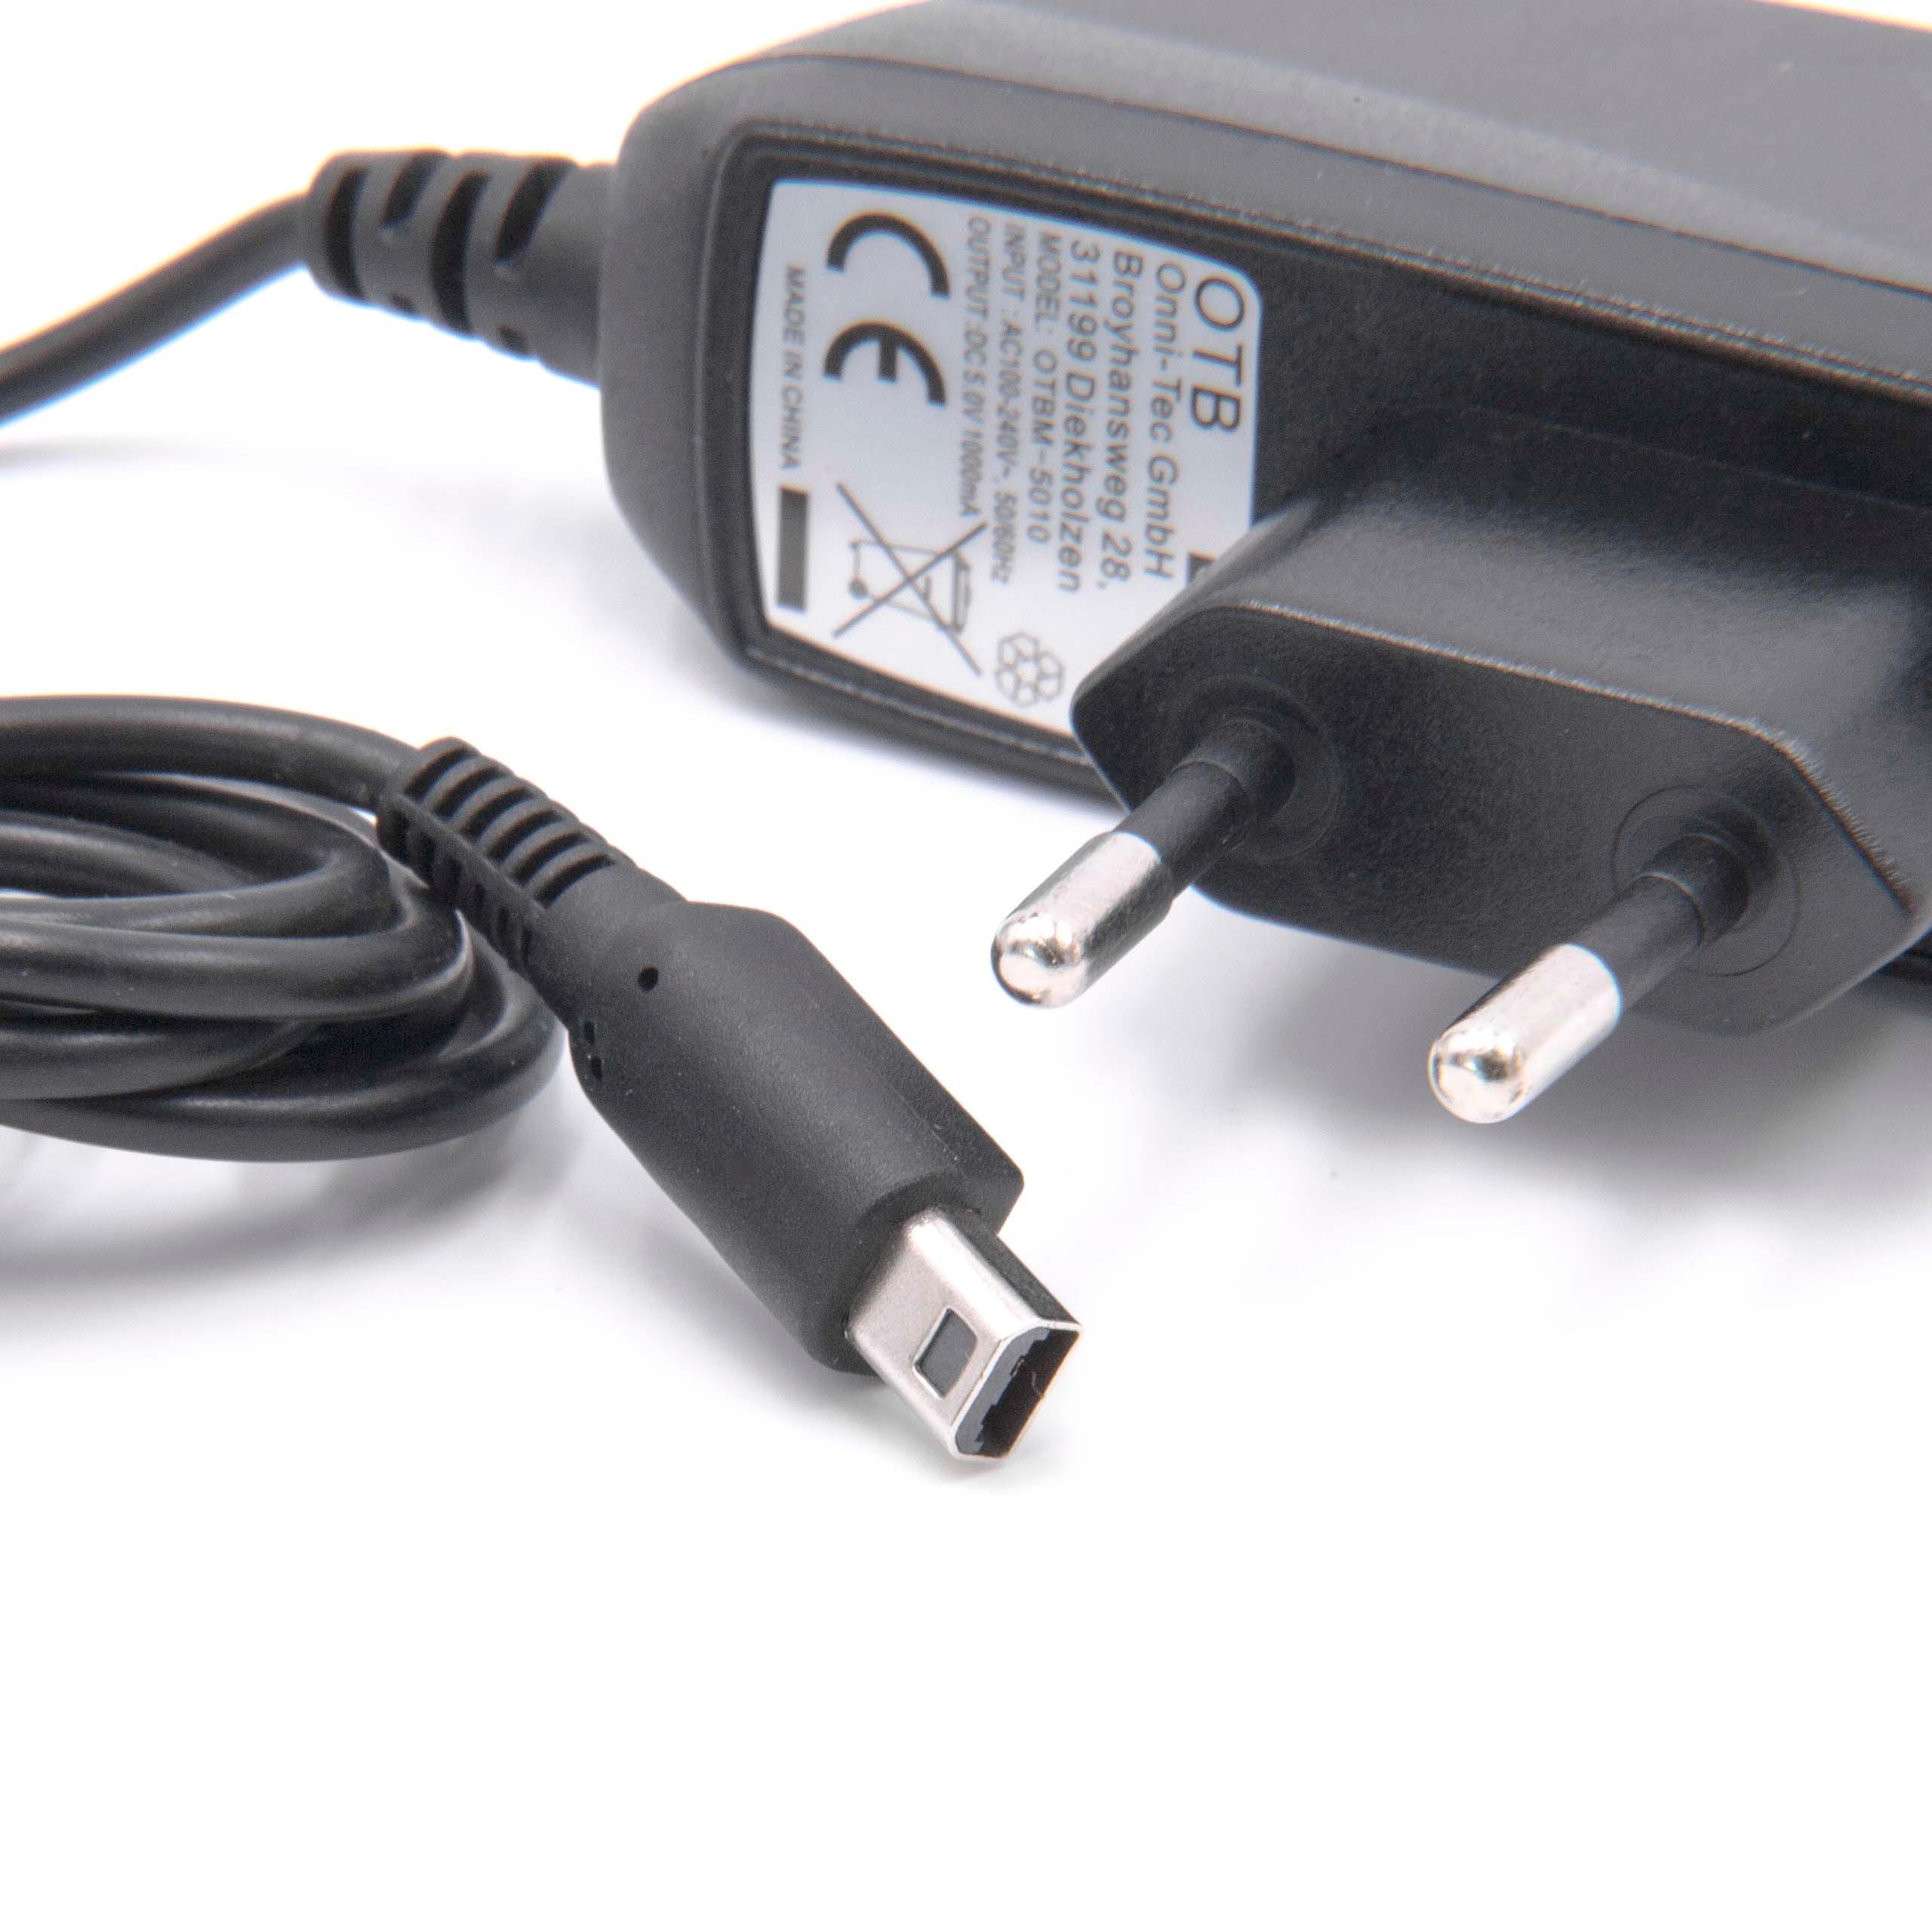 Charger suitable for Nintendo DSi Game Console